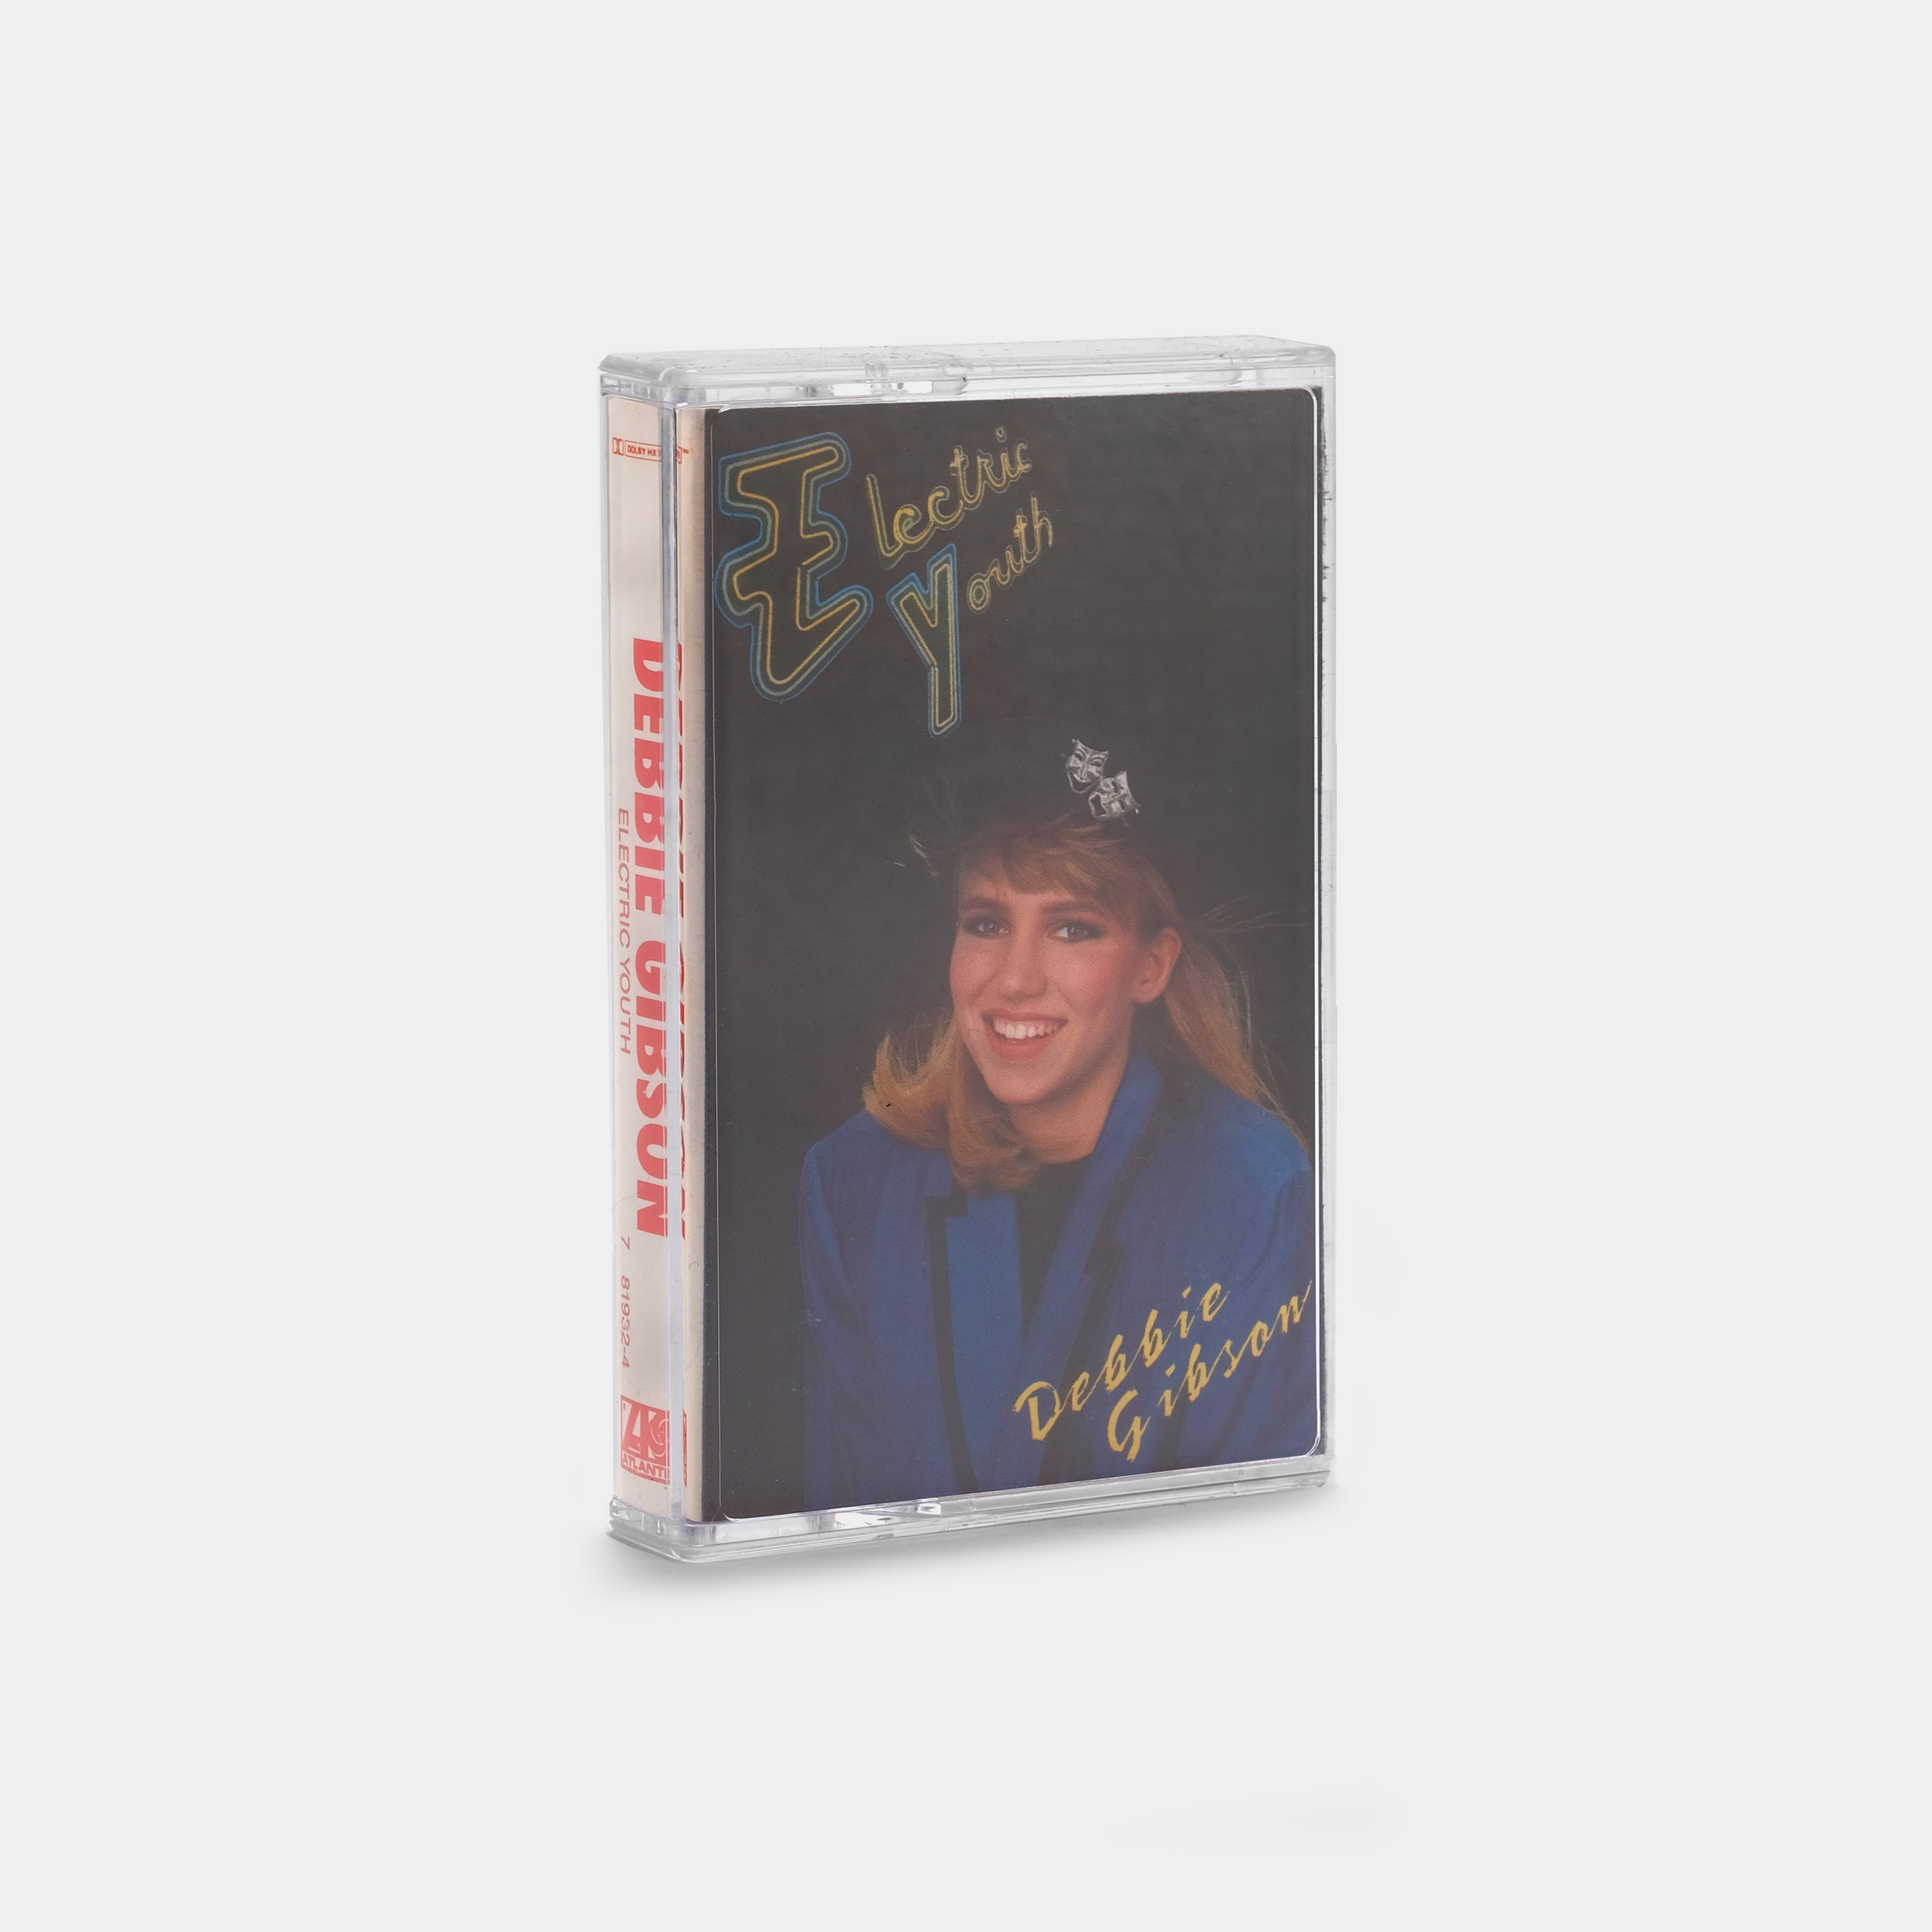 Debbie Gibson - Electric Youth Cassette Tape